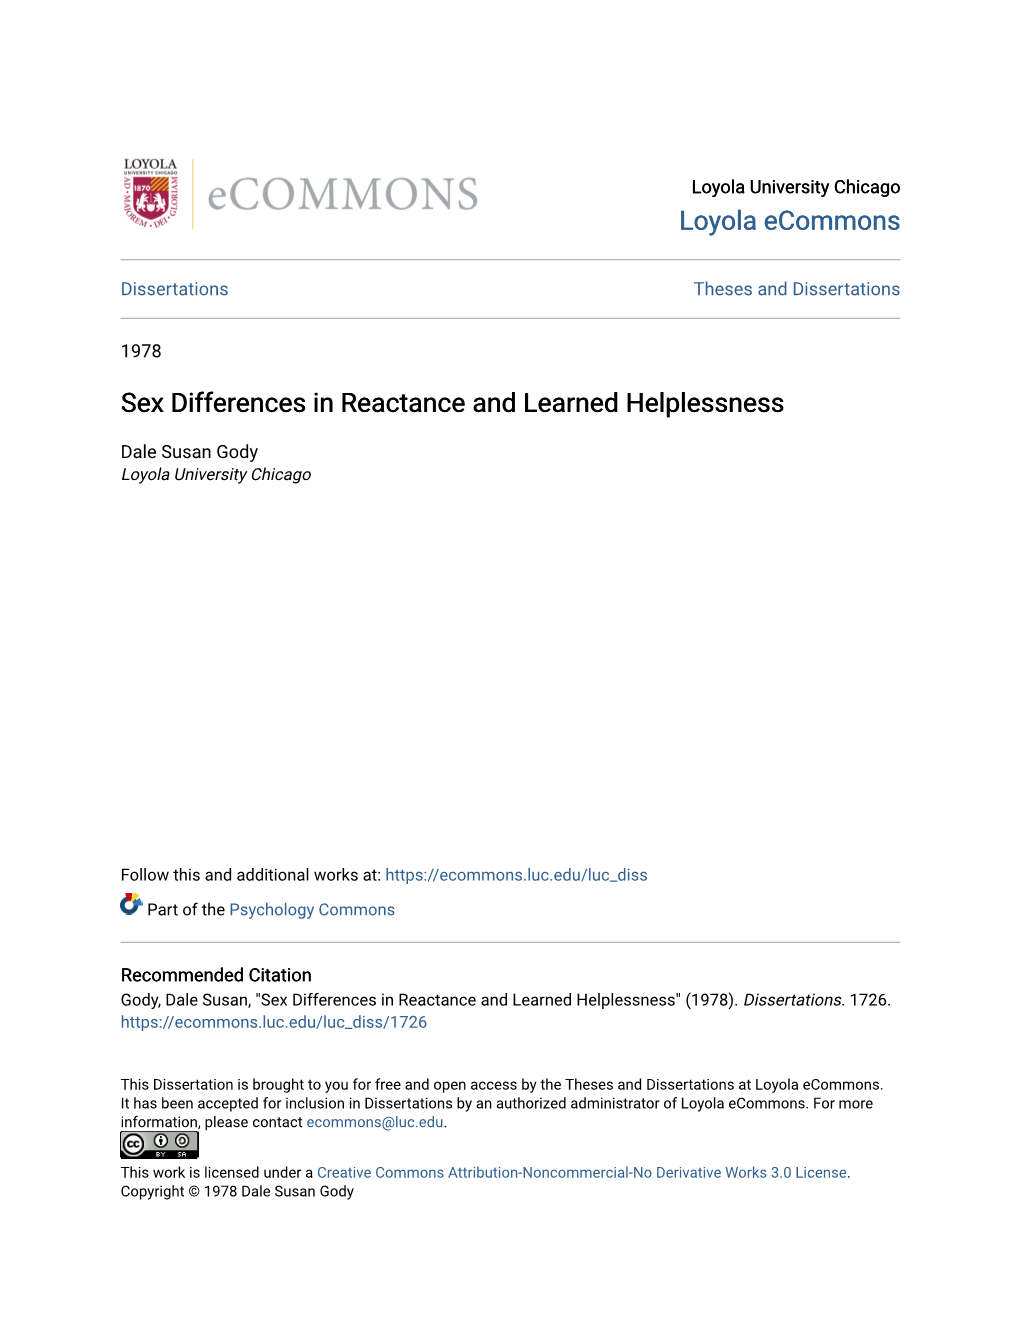 Sex Differences in Reactance and Learned Helplessness